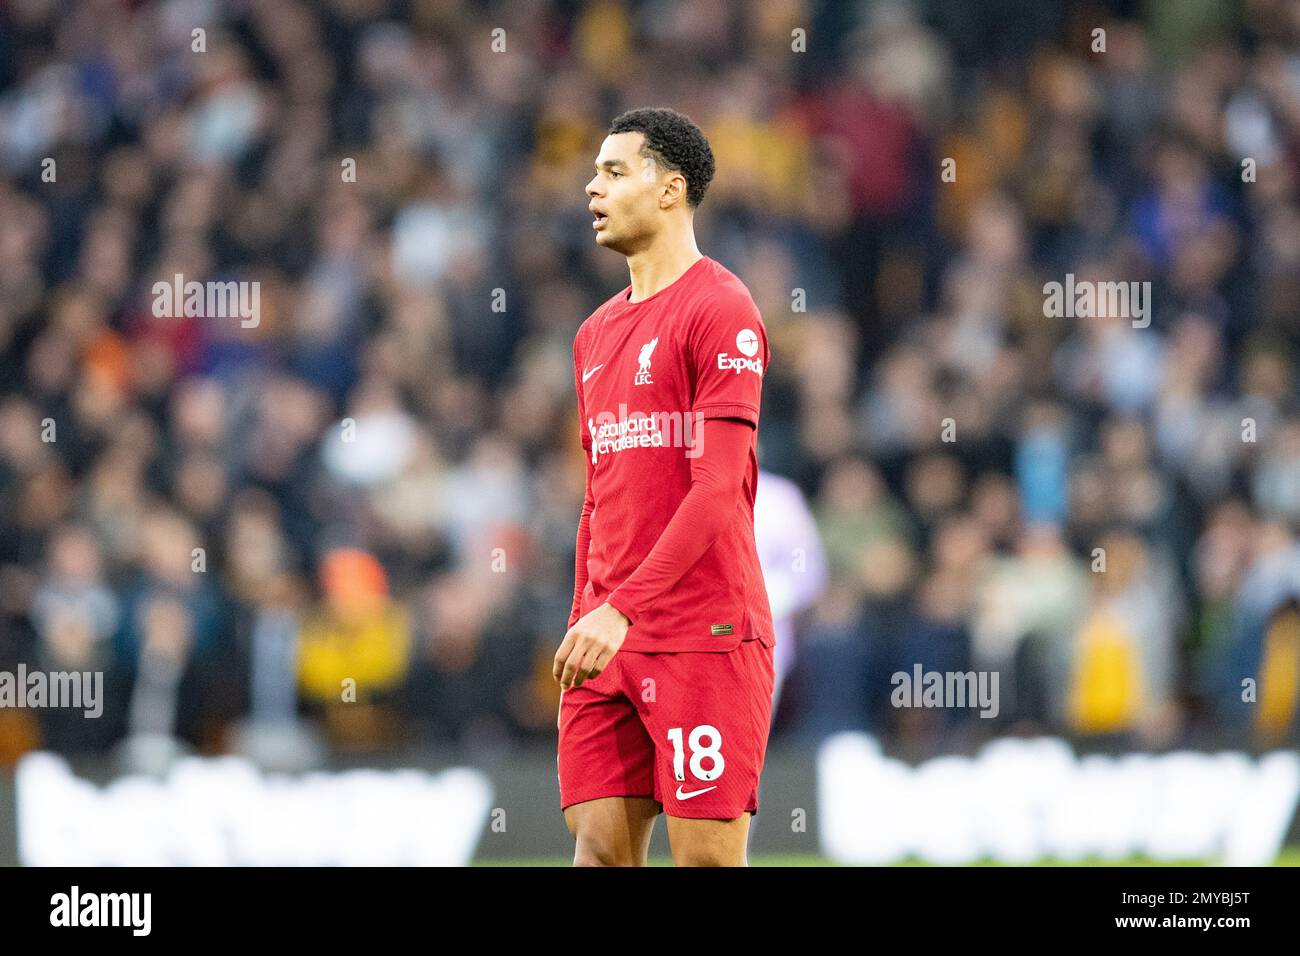 Cody Gakpo of Liverpool during the Premier League match between Wolverhampton Wanderers and Liverpool at Molineux, Wolverhampton on Saturday 4th February 2023. (Photo: Gustavo Pantano | MI News) Credit: MI News & Sport /Alamy Live News Stock Photo